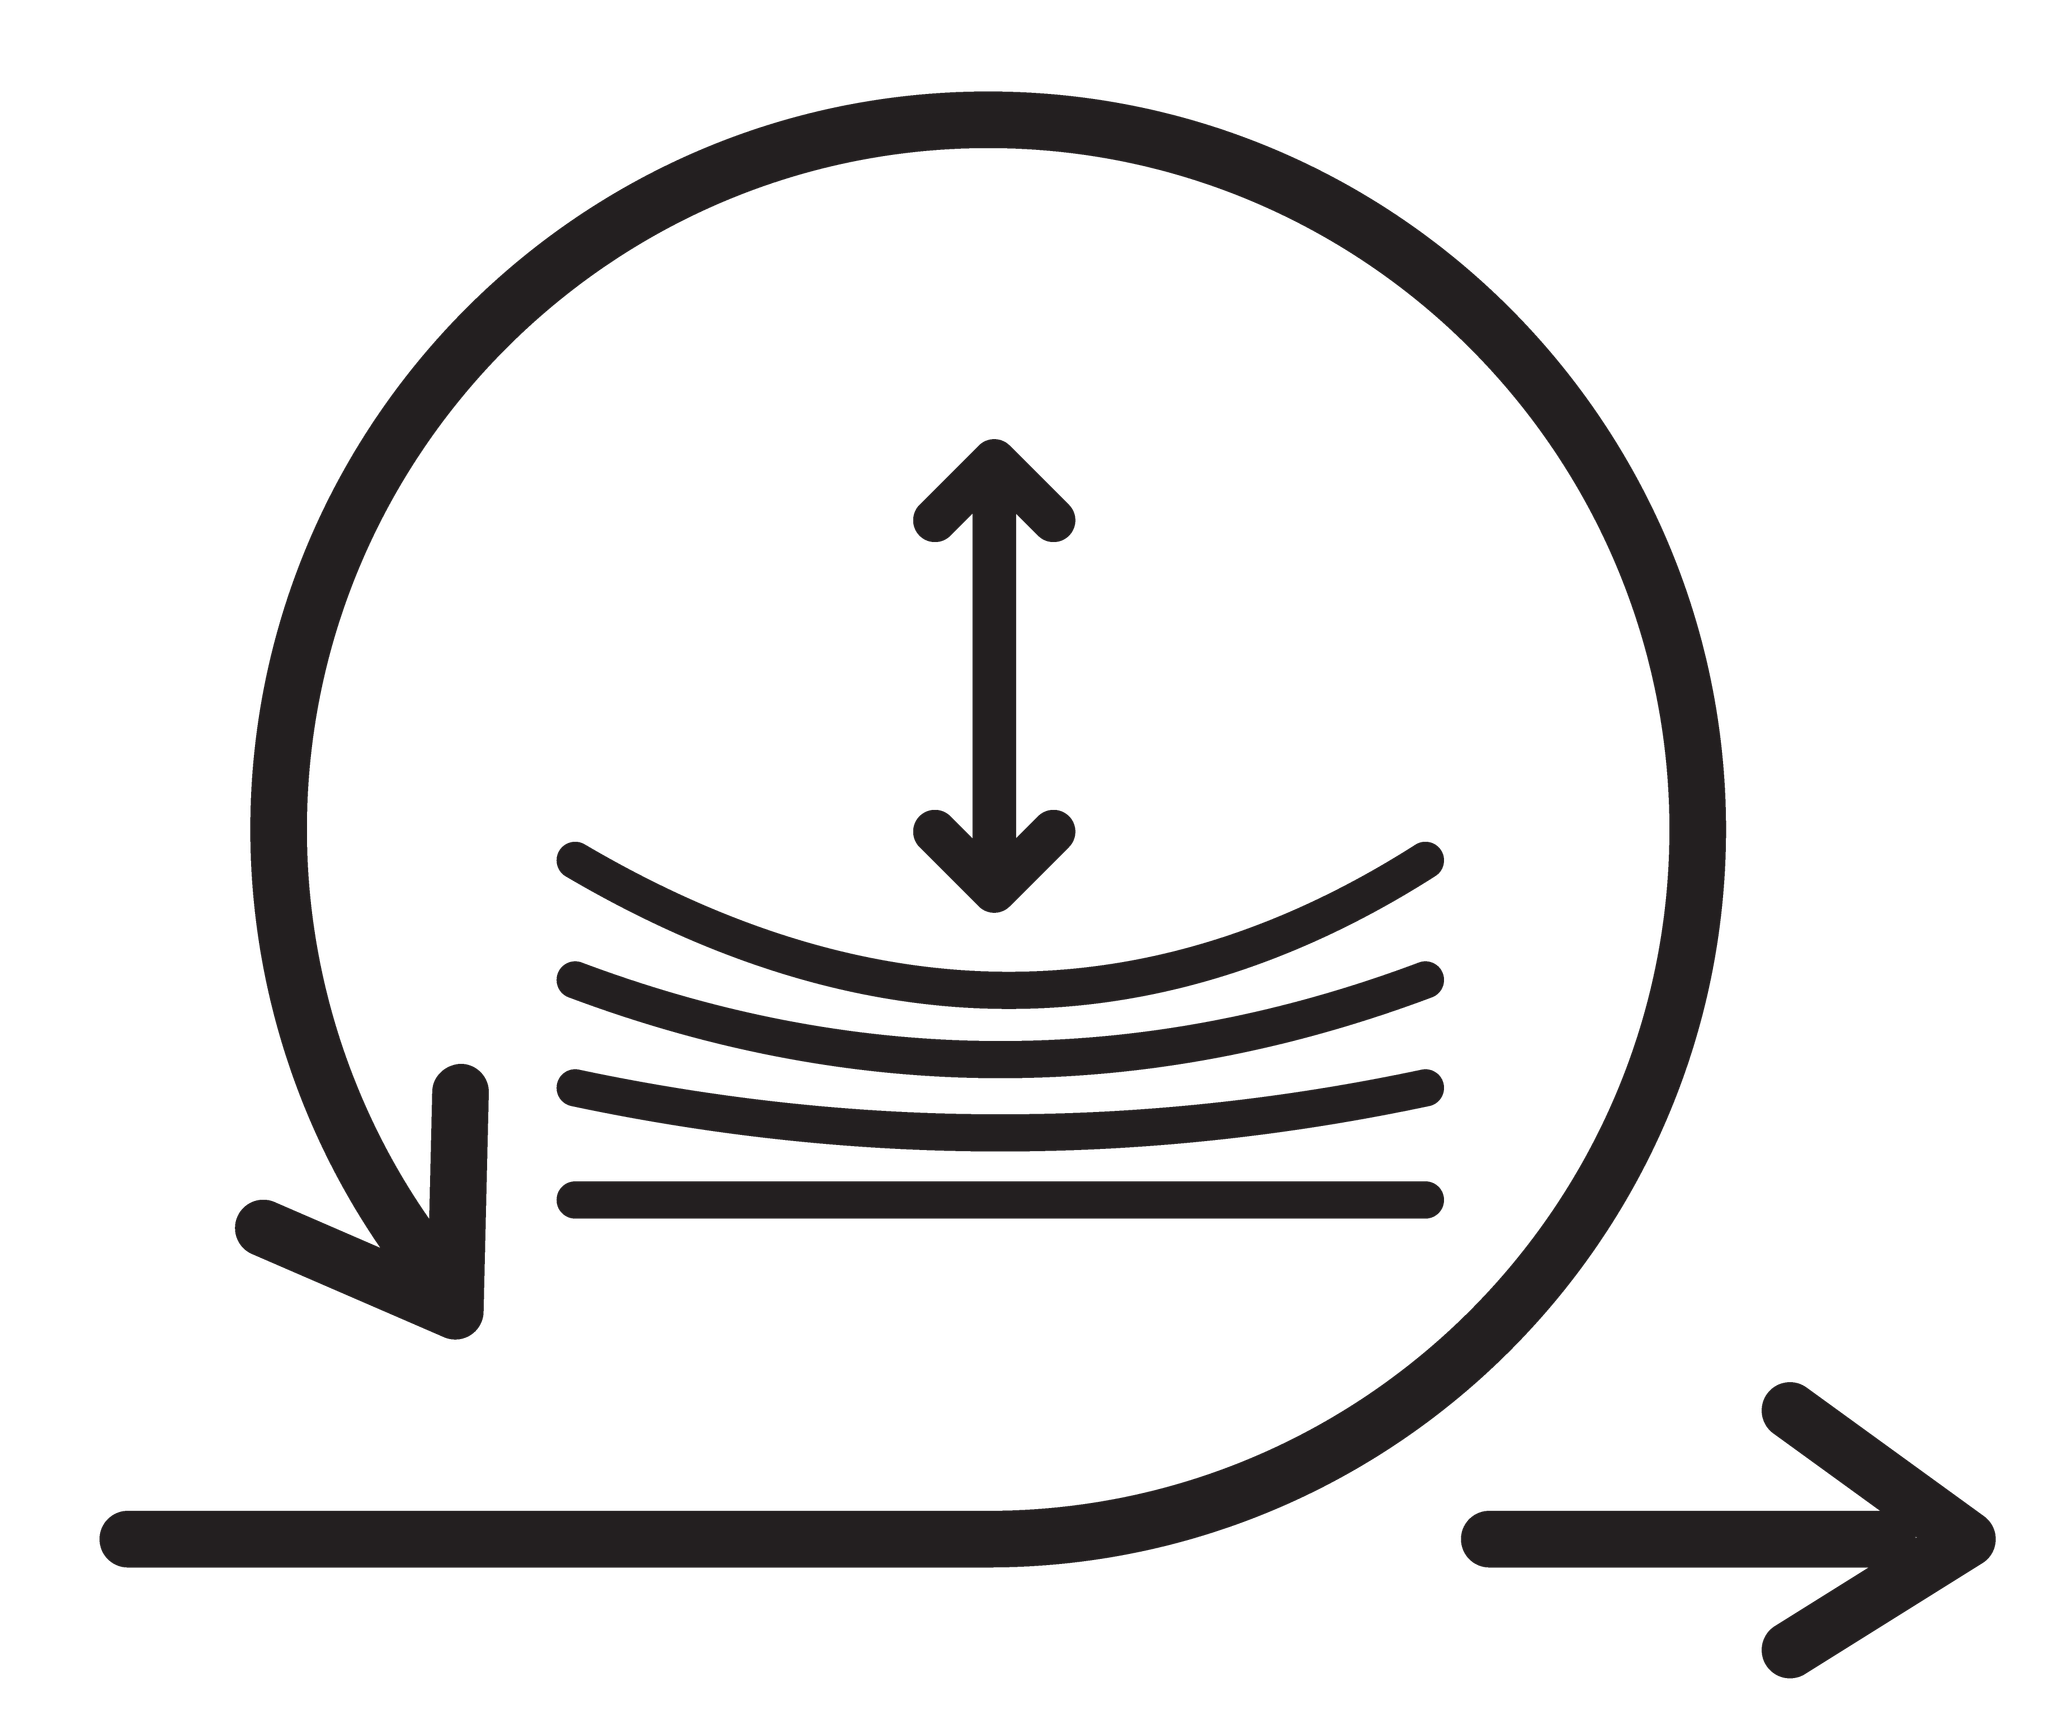 Icon representing digital agility and resilience. Links to a description of the digital resilience and agility driver.